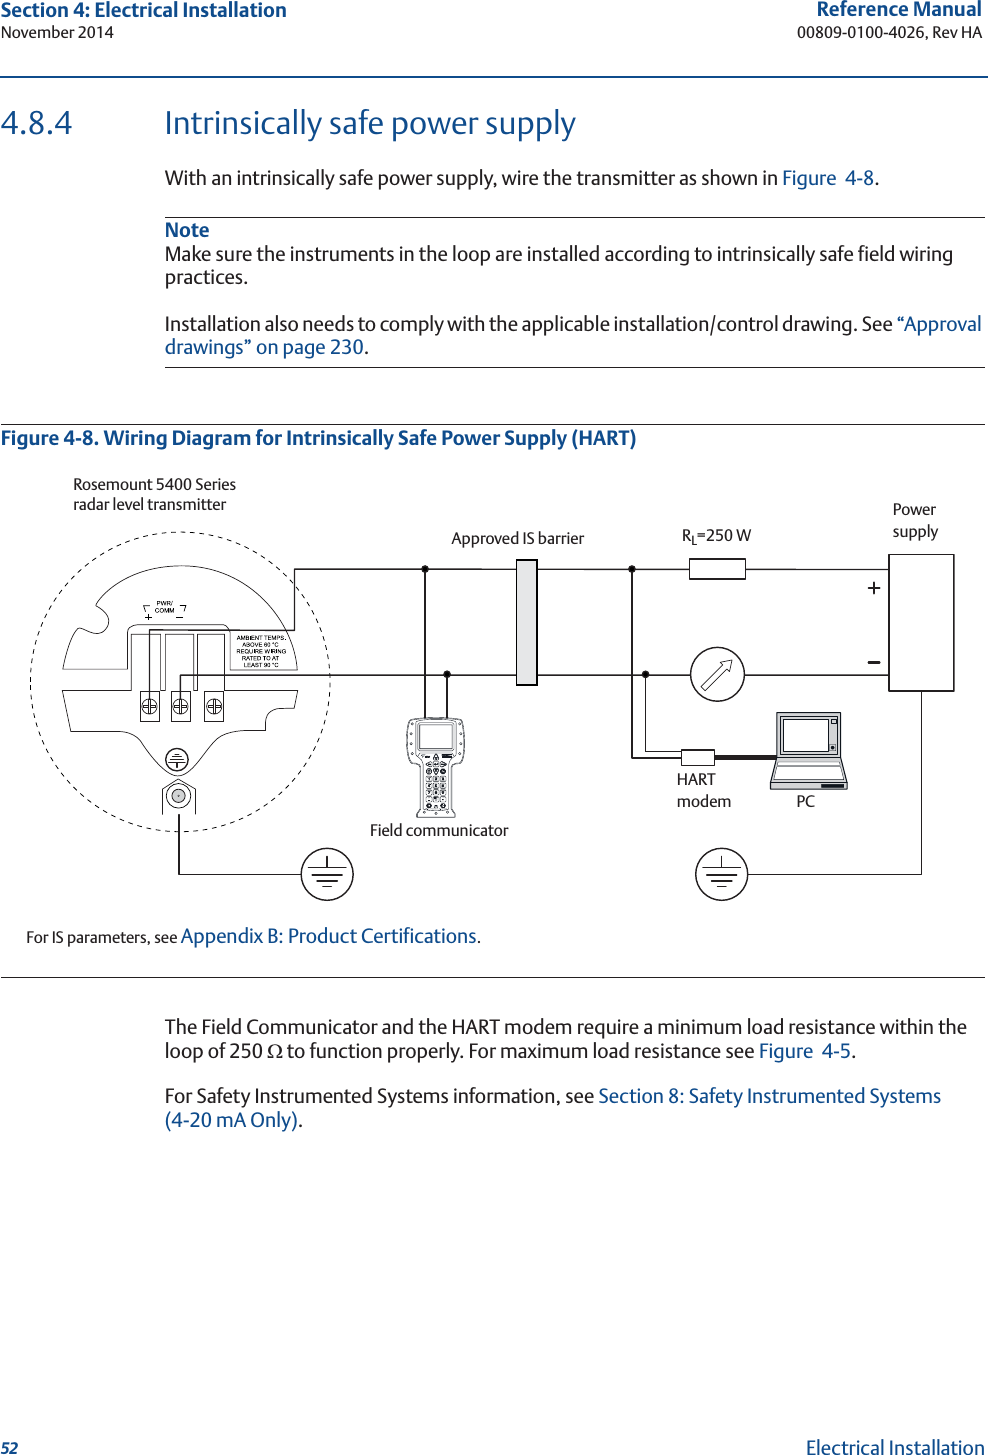 52Reference Manual00809-0100-4026, Rev HASection 4: Electrical InstallationNovember 2014Electrical Installation4.8.4 Intrinsically safe power supplyWith an intrinsically safe power supply, wire the transmitter as shown in Figure 4-8.NoteMake sure the instruments in the loop are installed according to intrinsically safe field wiring practices.Installation also needs to comply with the applicable installation/control drawing. See “Approval drawings” on page 230.Figure 4-8. Wiring Diagram for Intrinsically Safe Power Supply (HART)The Field Communicator and the HART modem require a minimum load resistance within the loop of 250 : to function properly. For maximum load resistance see Figure 4-5. For Safety Instrumented Systems information, see Section 8: Safety Instrumented Systems (4-20 mA Only). For IS parameters, see Appendix B: Product Certifications.Rosemount 5400 Series radar level transmitterApproved IS barrierRL=250 WPowersupplyField communicatorHARTmodemPC